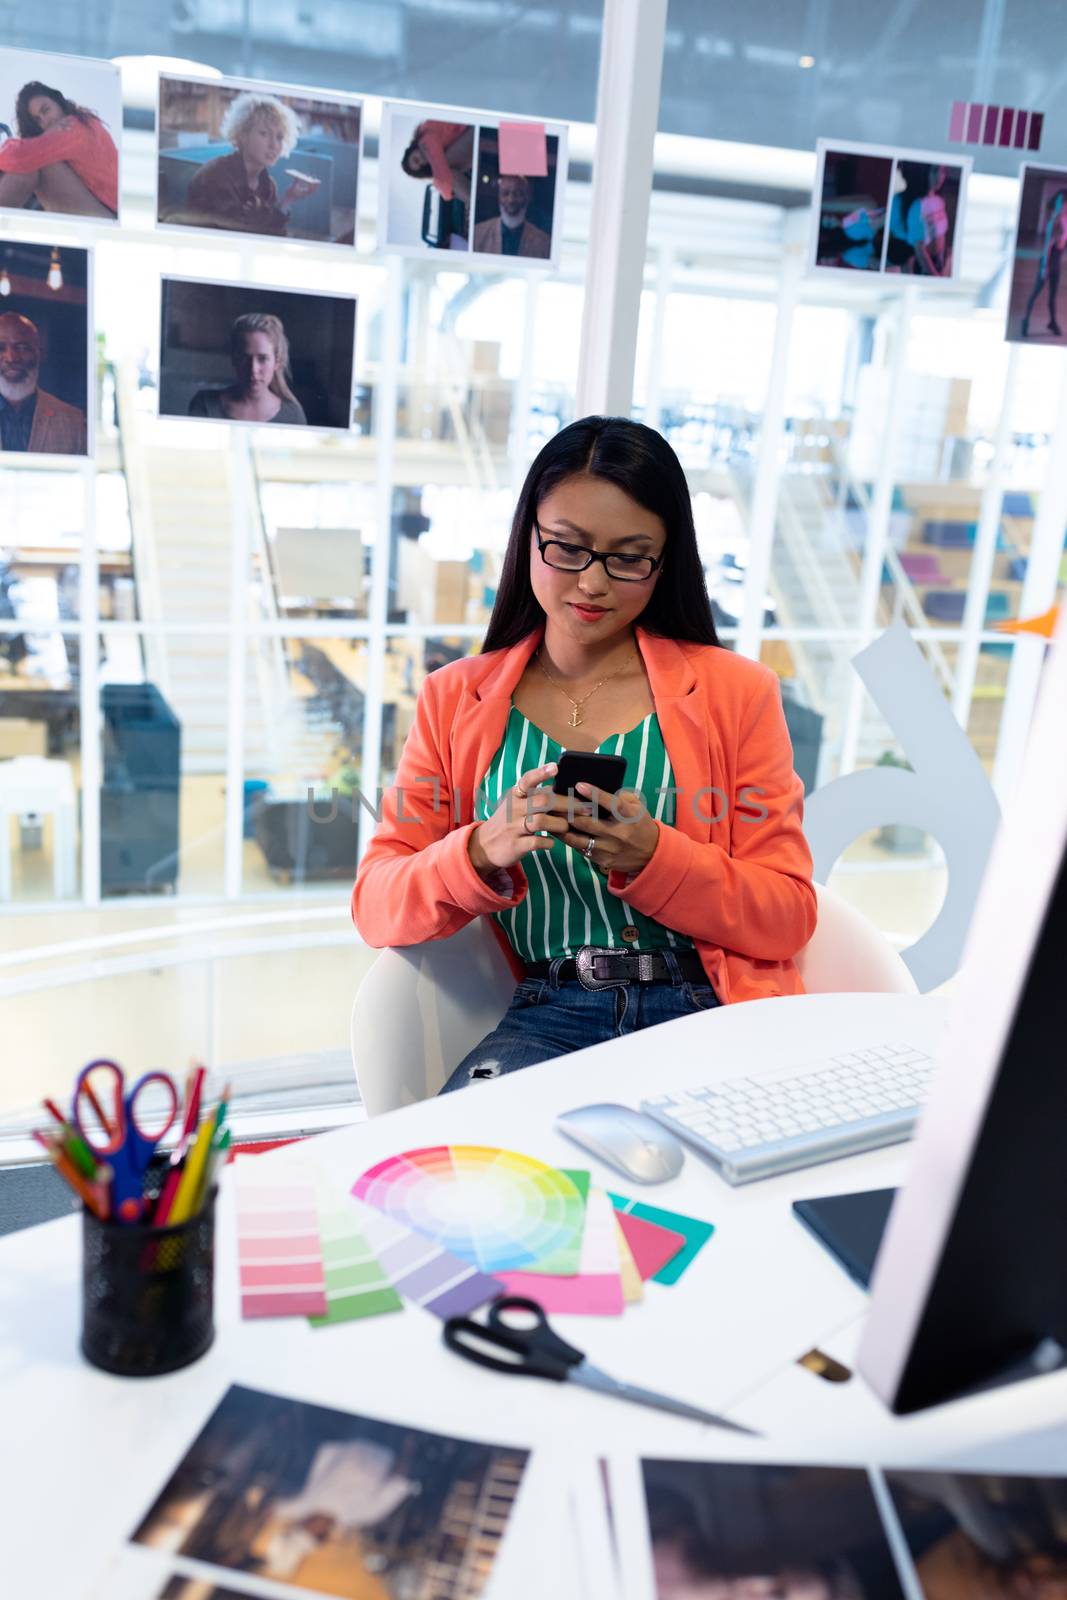 Front view of young pretty Asian female graphic designer using mobile phone at desk in office. This is a casual creative start-up business office for a diverse team